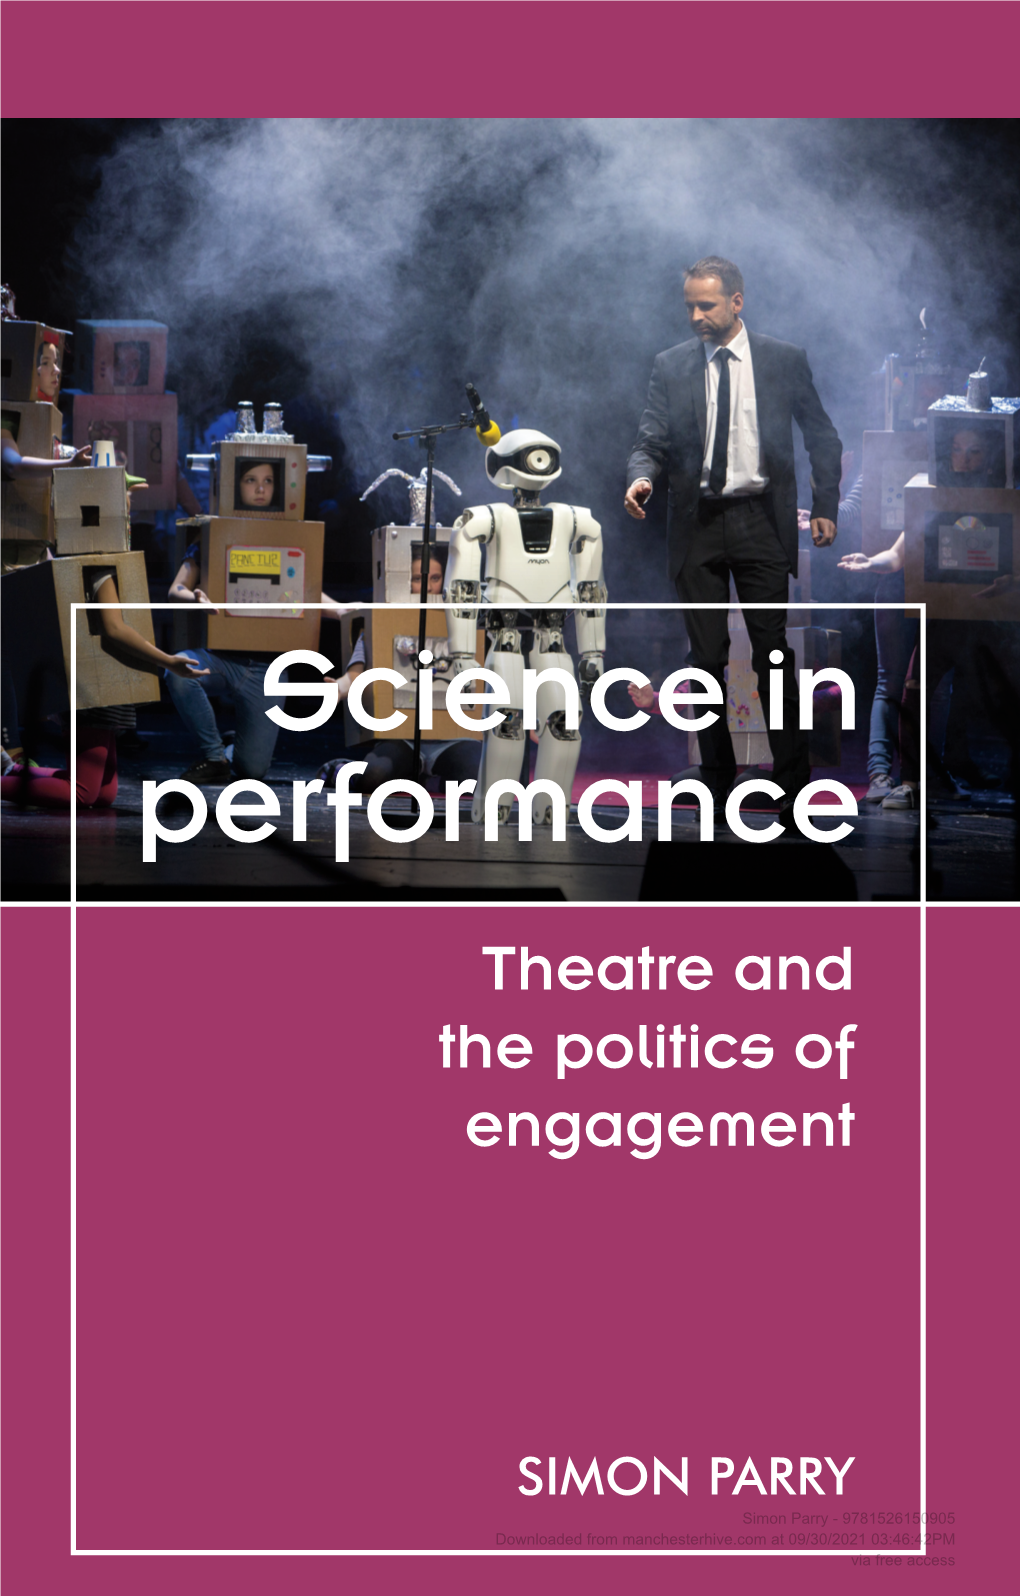 Theatre and the Politics of Engagement